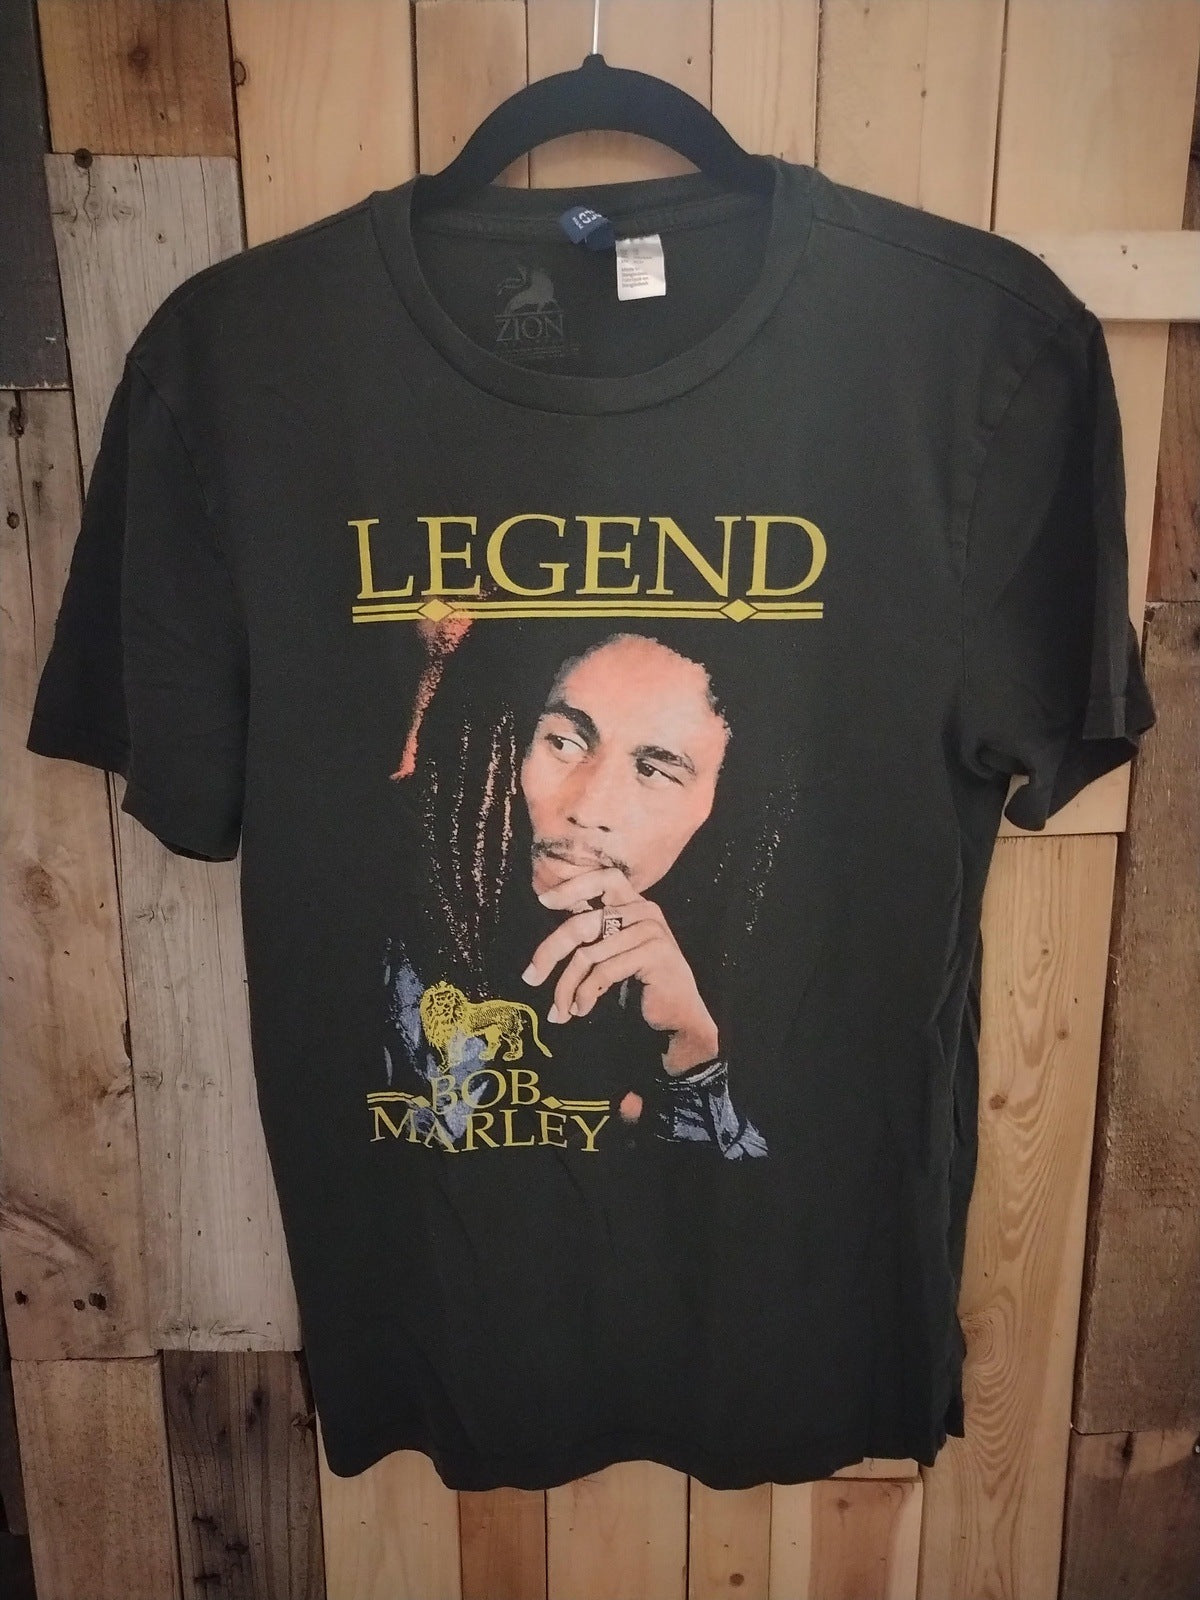 Bob Marley Official Merchandise by H&M "Legend" T Shirt Size XS 317931WH